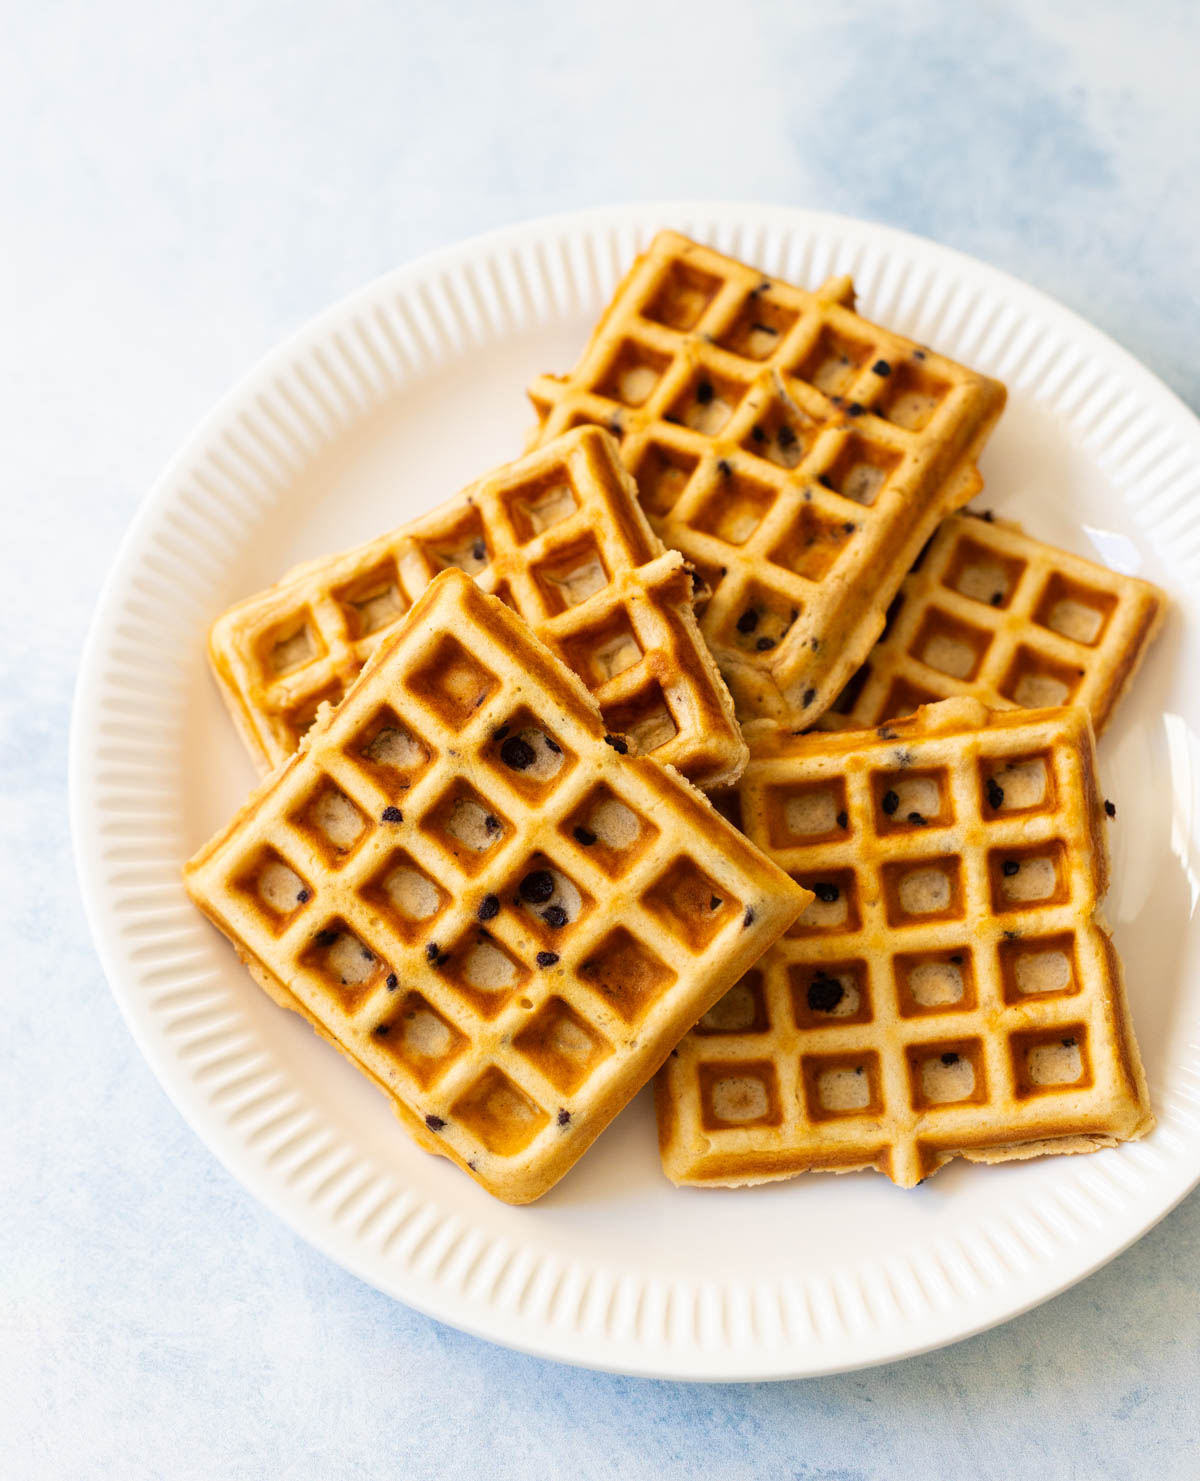 A stack of waffles are on a white plate.